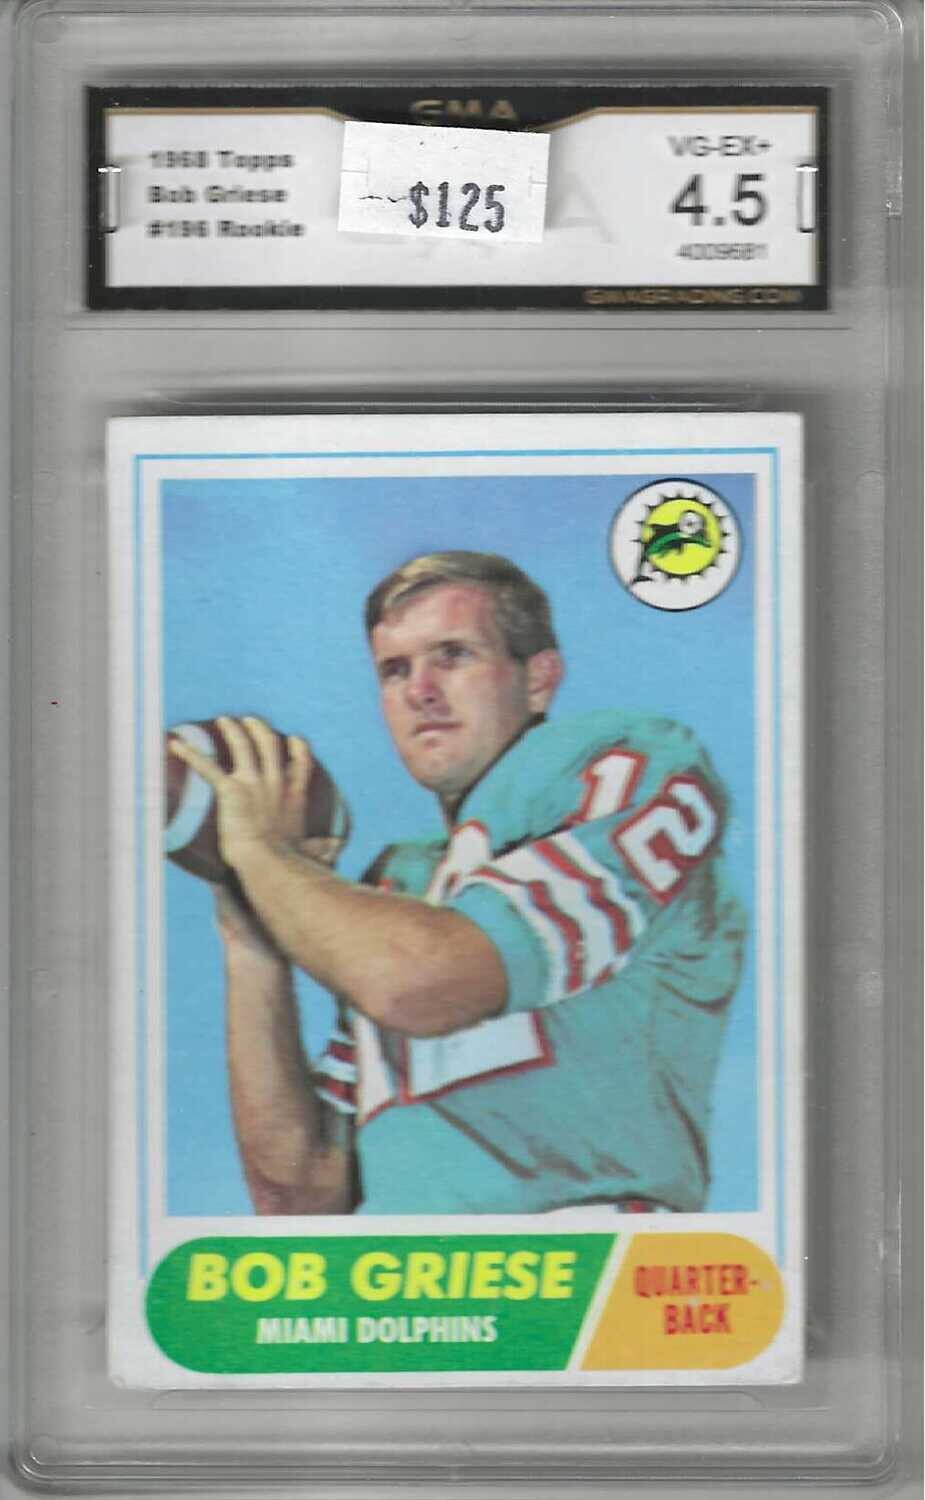 1968 Topps #196 Bob Griese rookie GMA graded 4.5